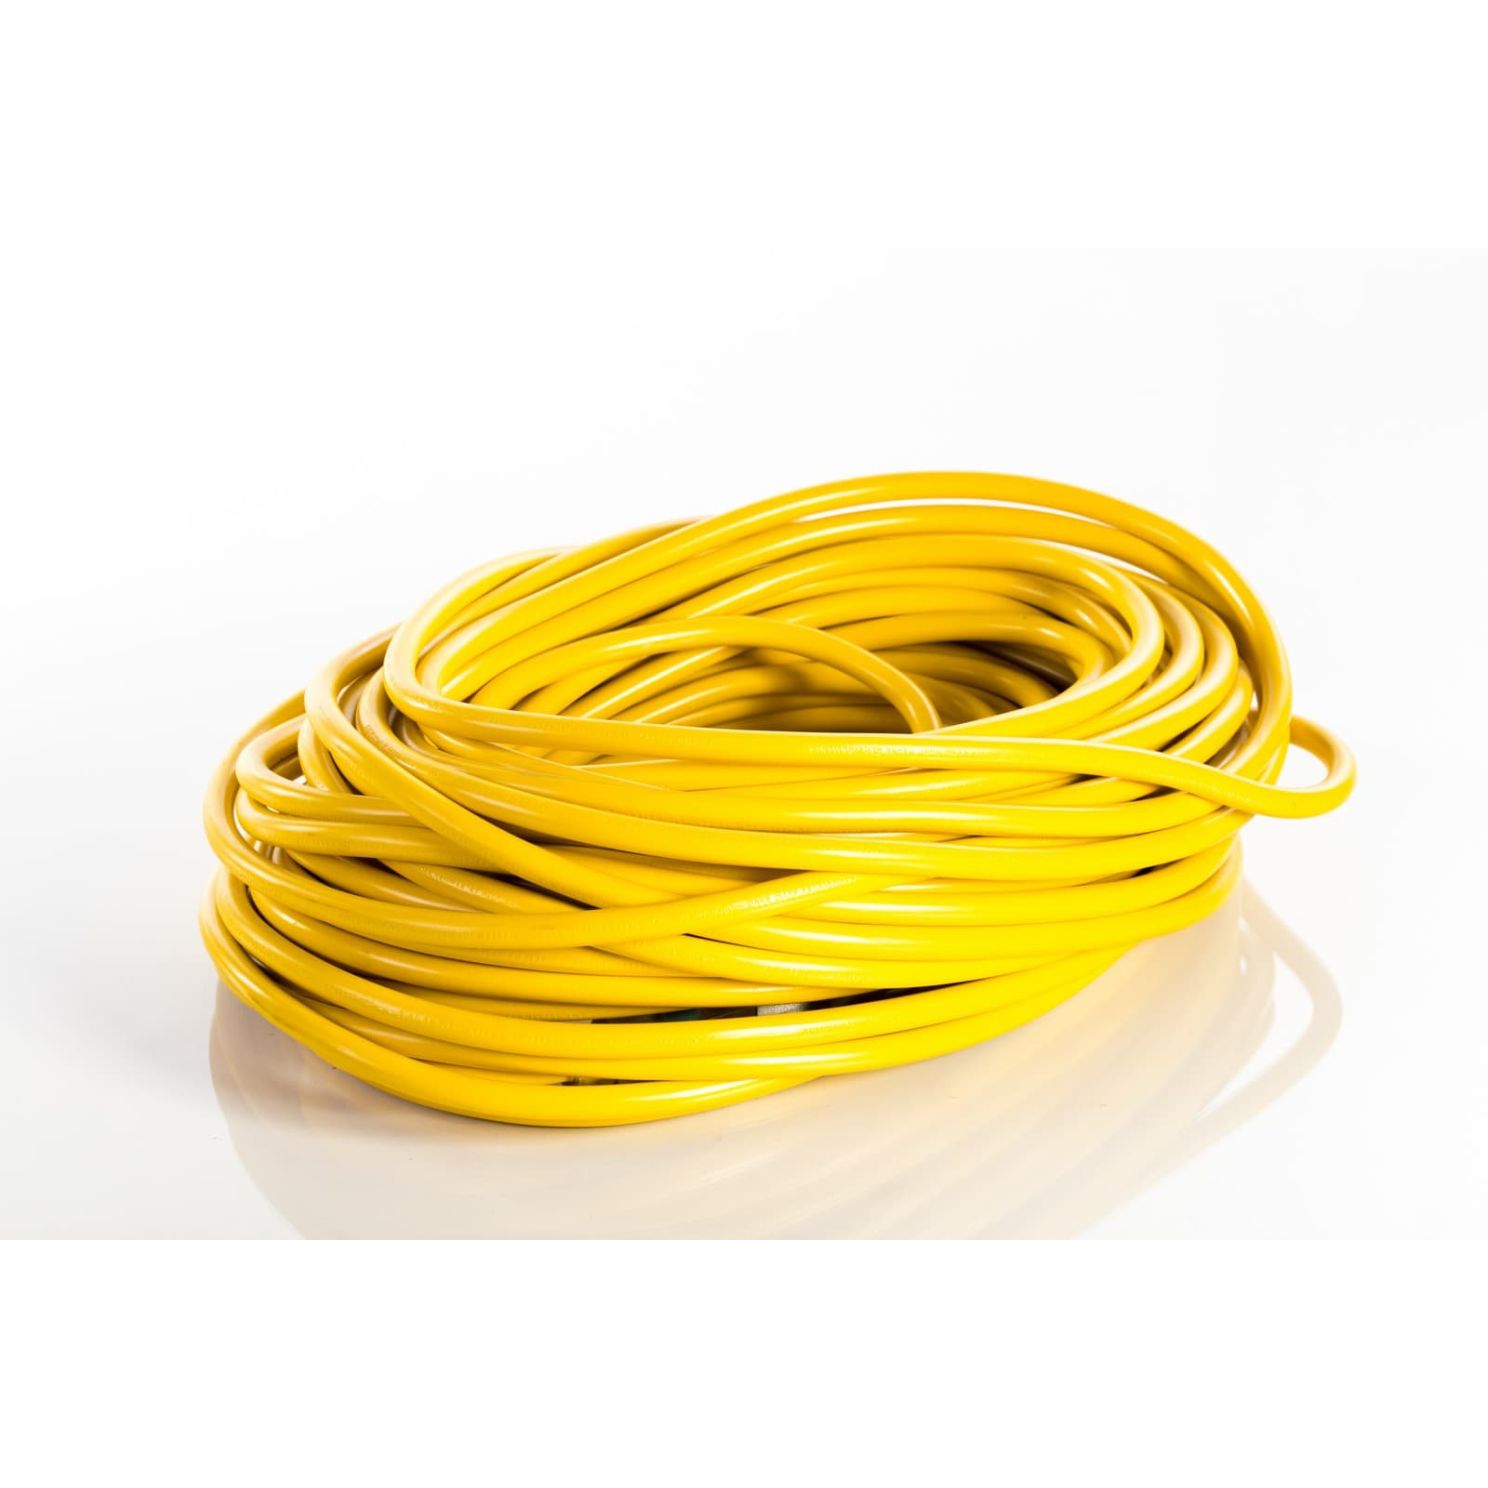 Coleman 100' Yellow High Visibility Lighted End Drop Cord 12/3